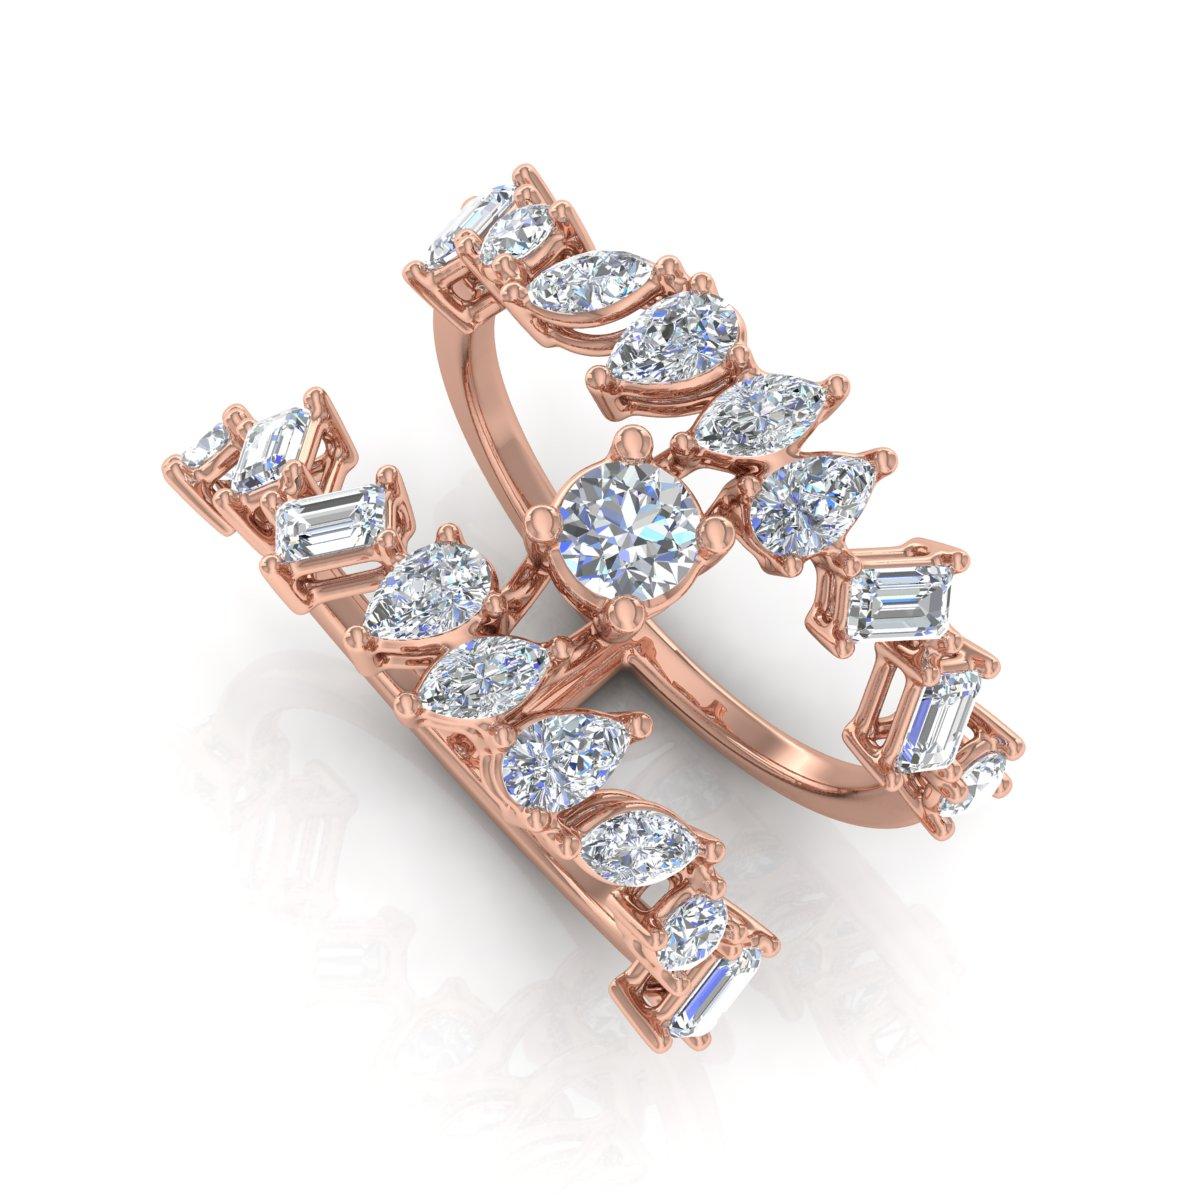 For Sale:  2.35 Carat SI Clarity HI Color Diamond Designer Ring Solid 18k Rose Gold Jewelry 7